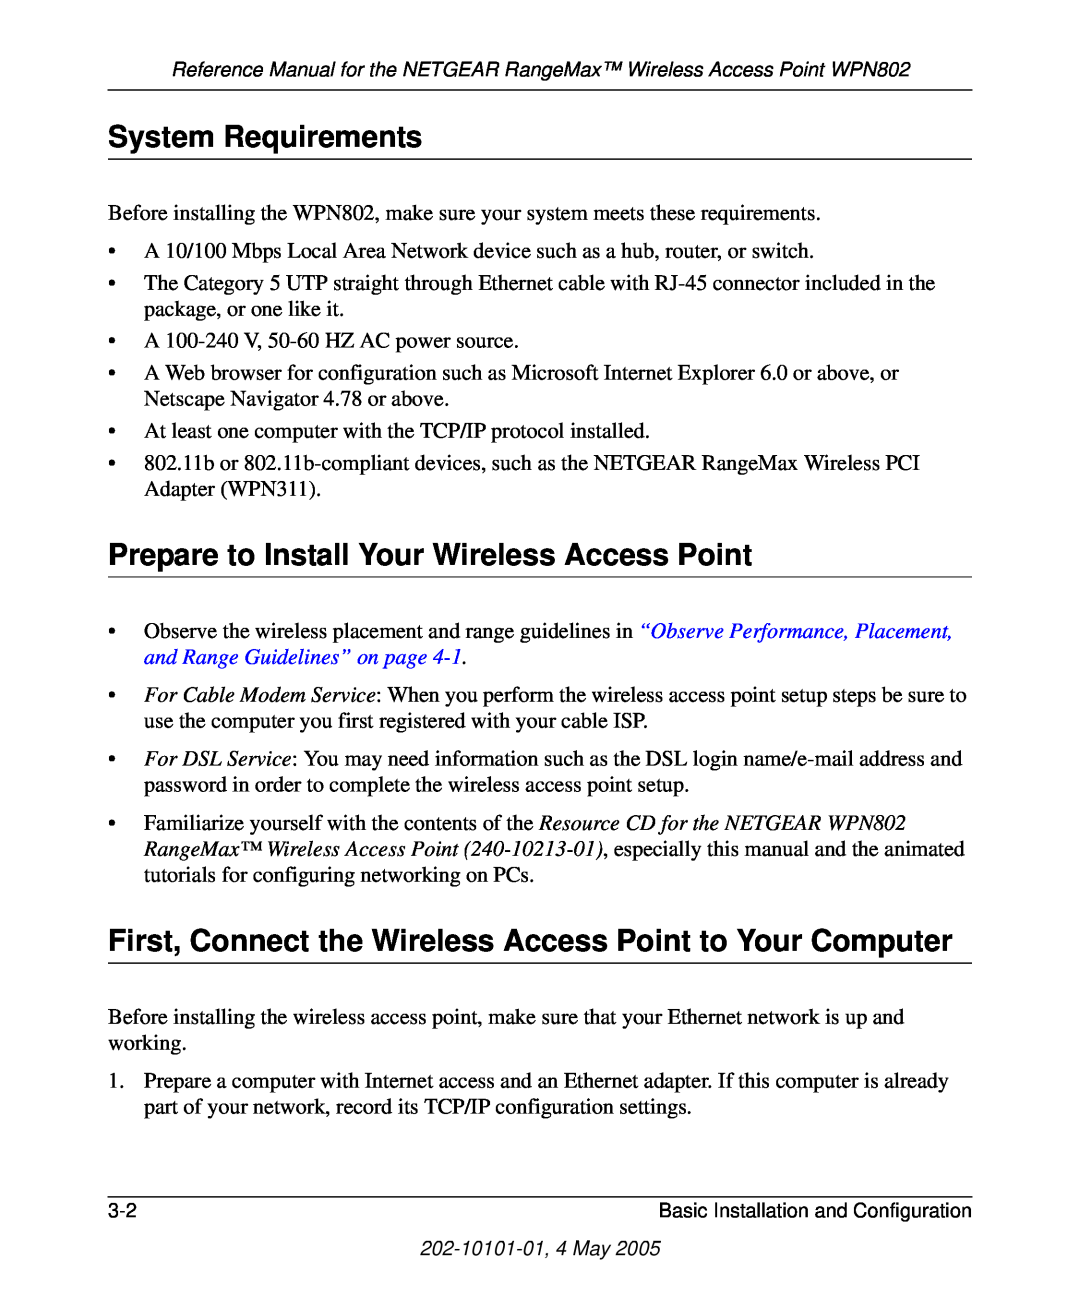 NETGEAR WPN802 manual System Requirements, Prepare to Install Your Wireless Access Point 